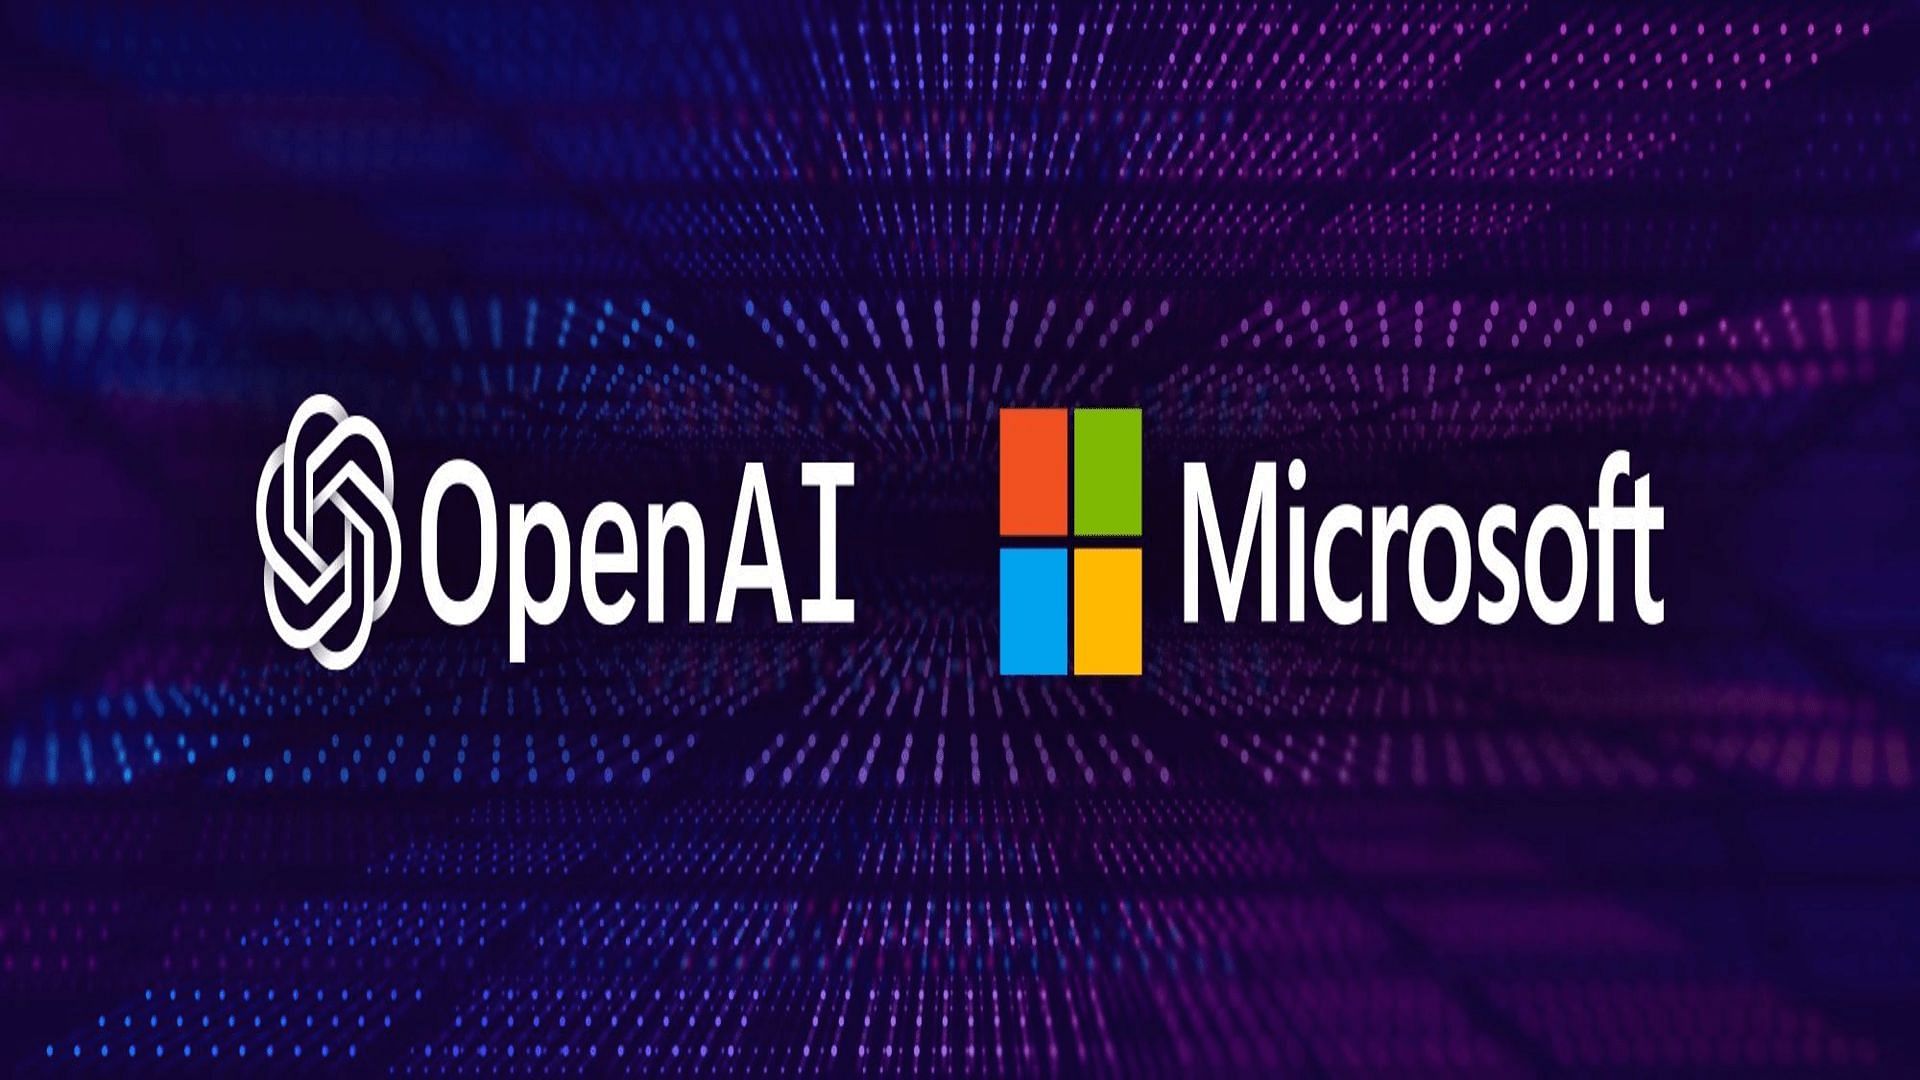 Microsoft CEO confirms ChatGPT integration with Azure OpenAI services